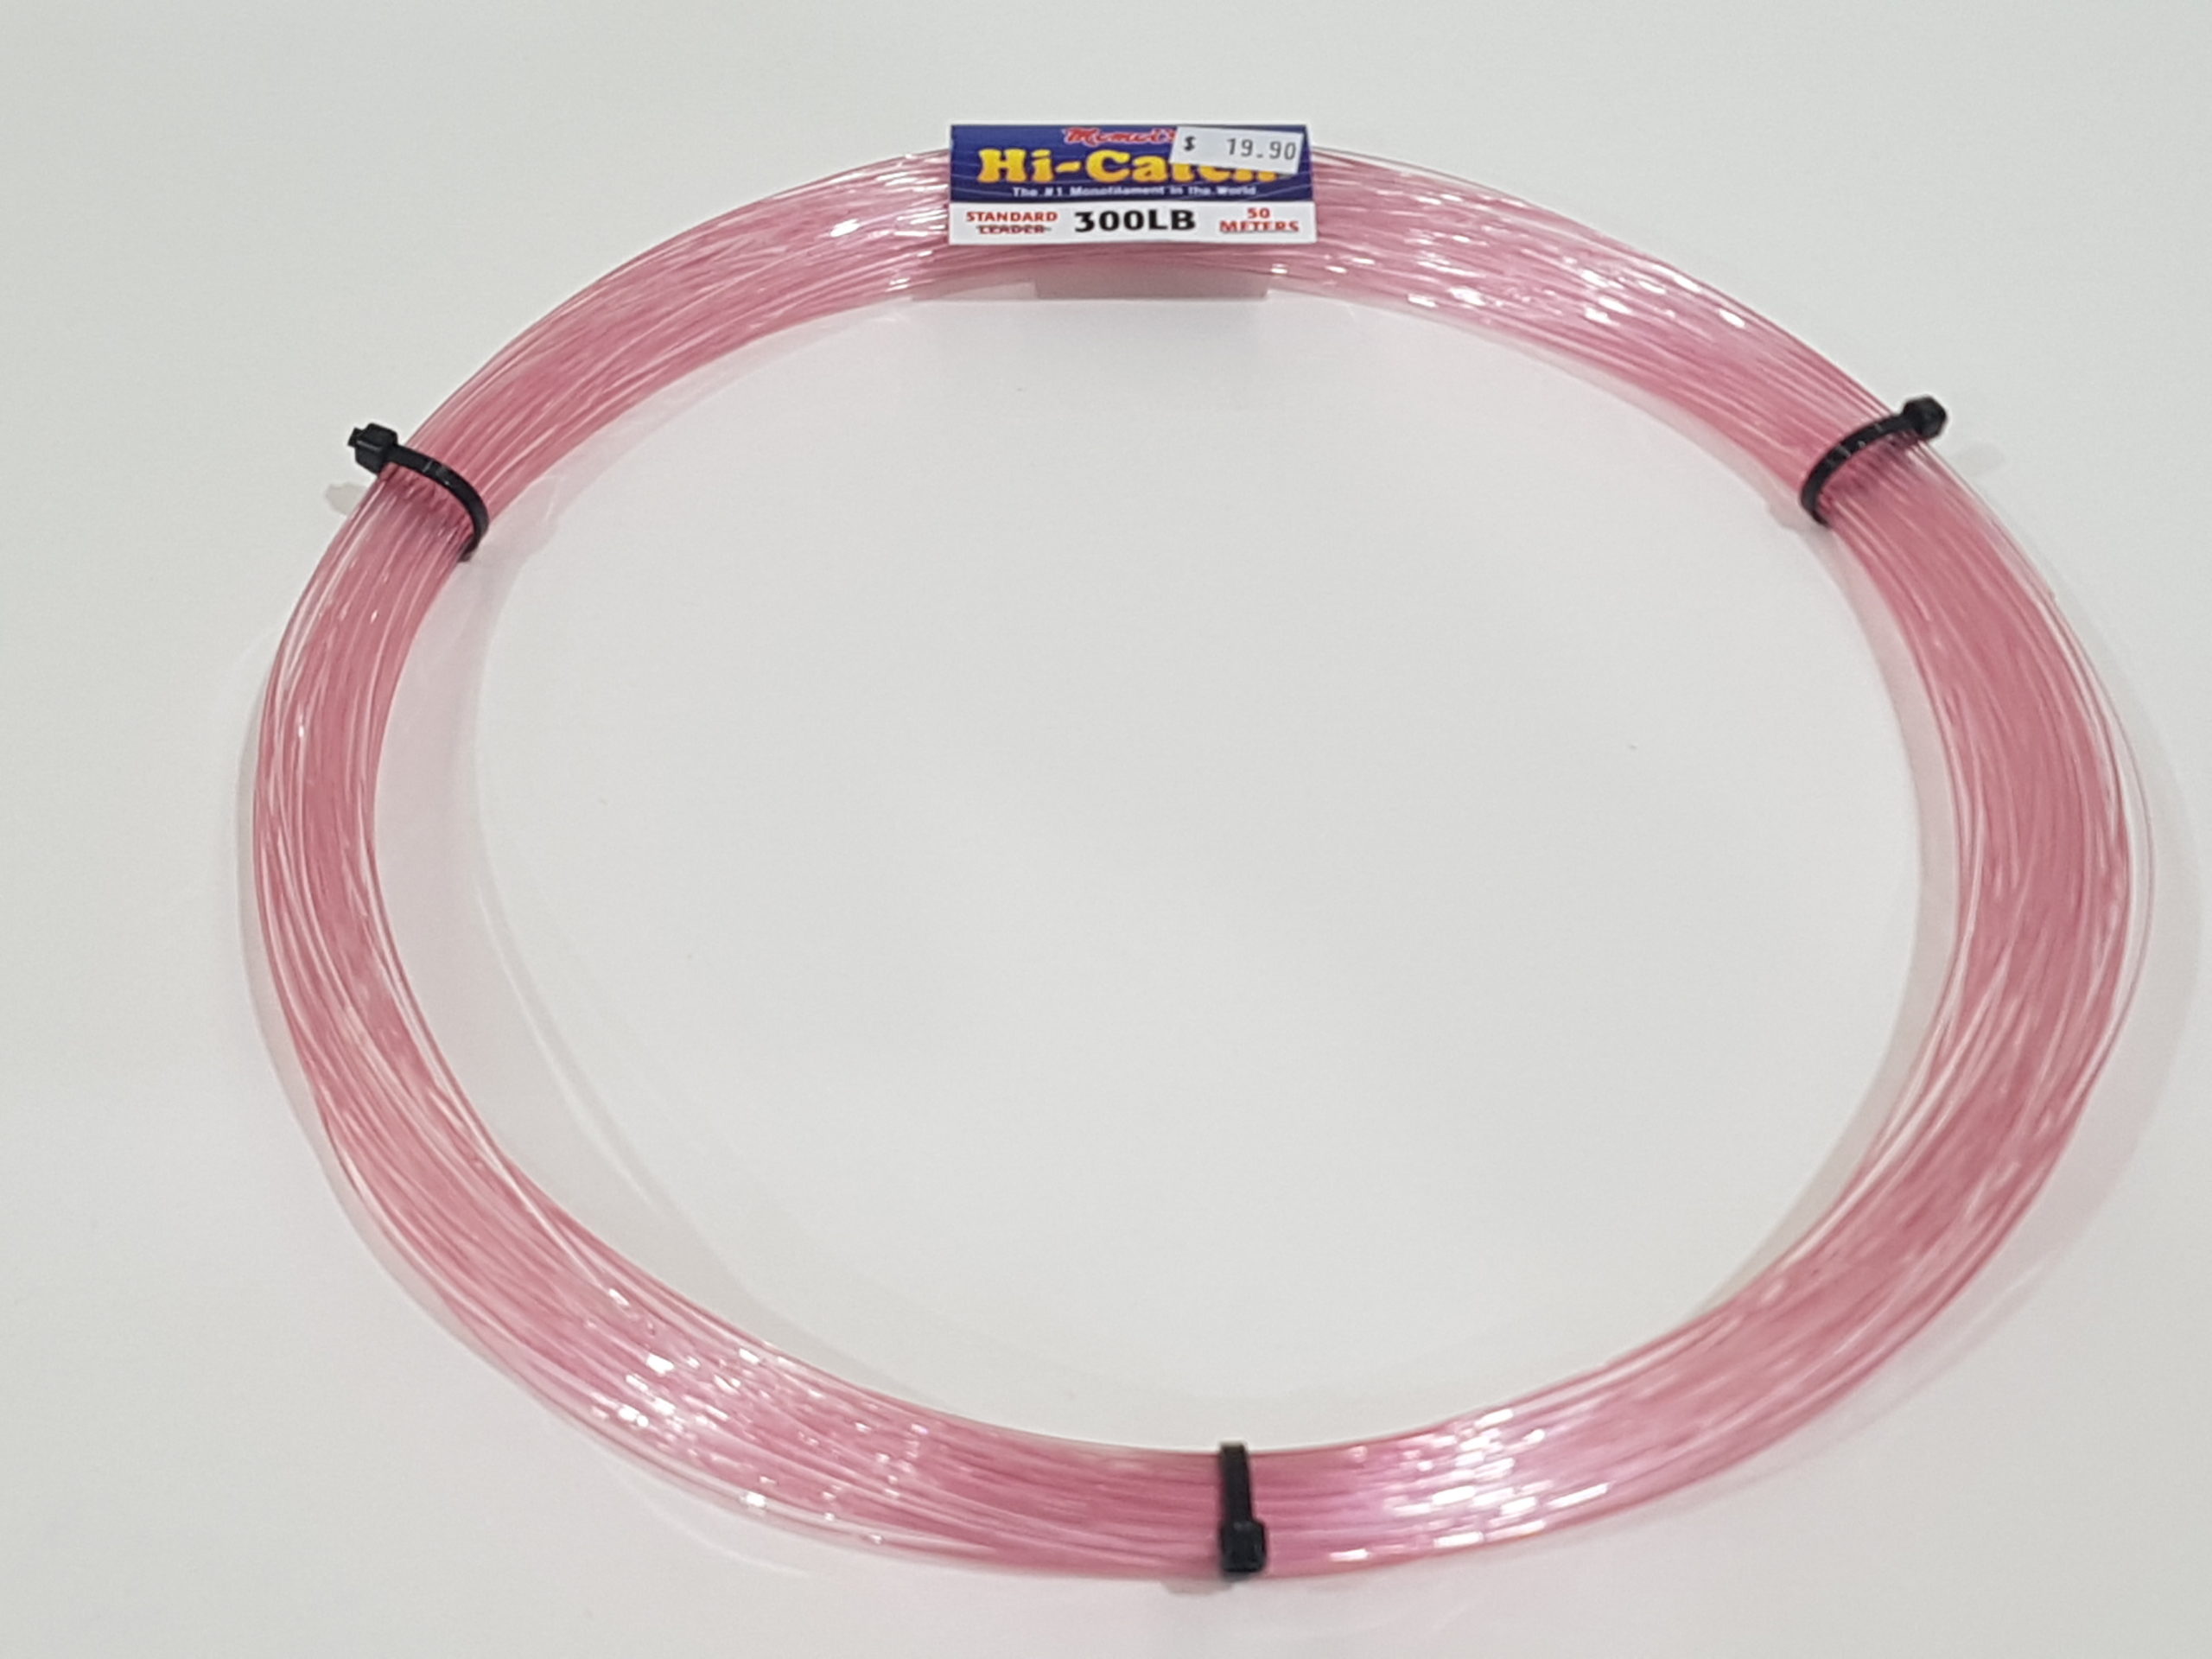 Spiderwire Pink Fishing Line & Leaders for sale